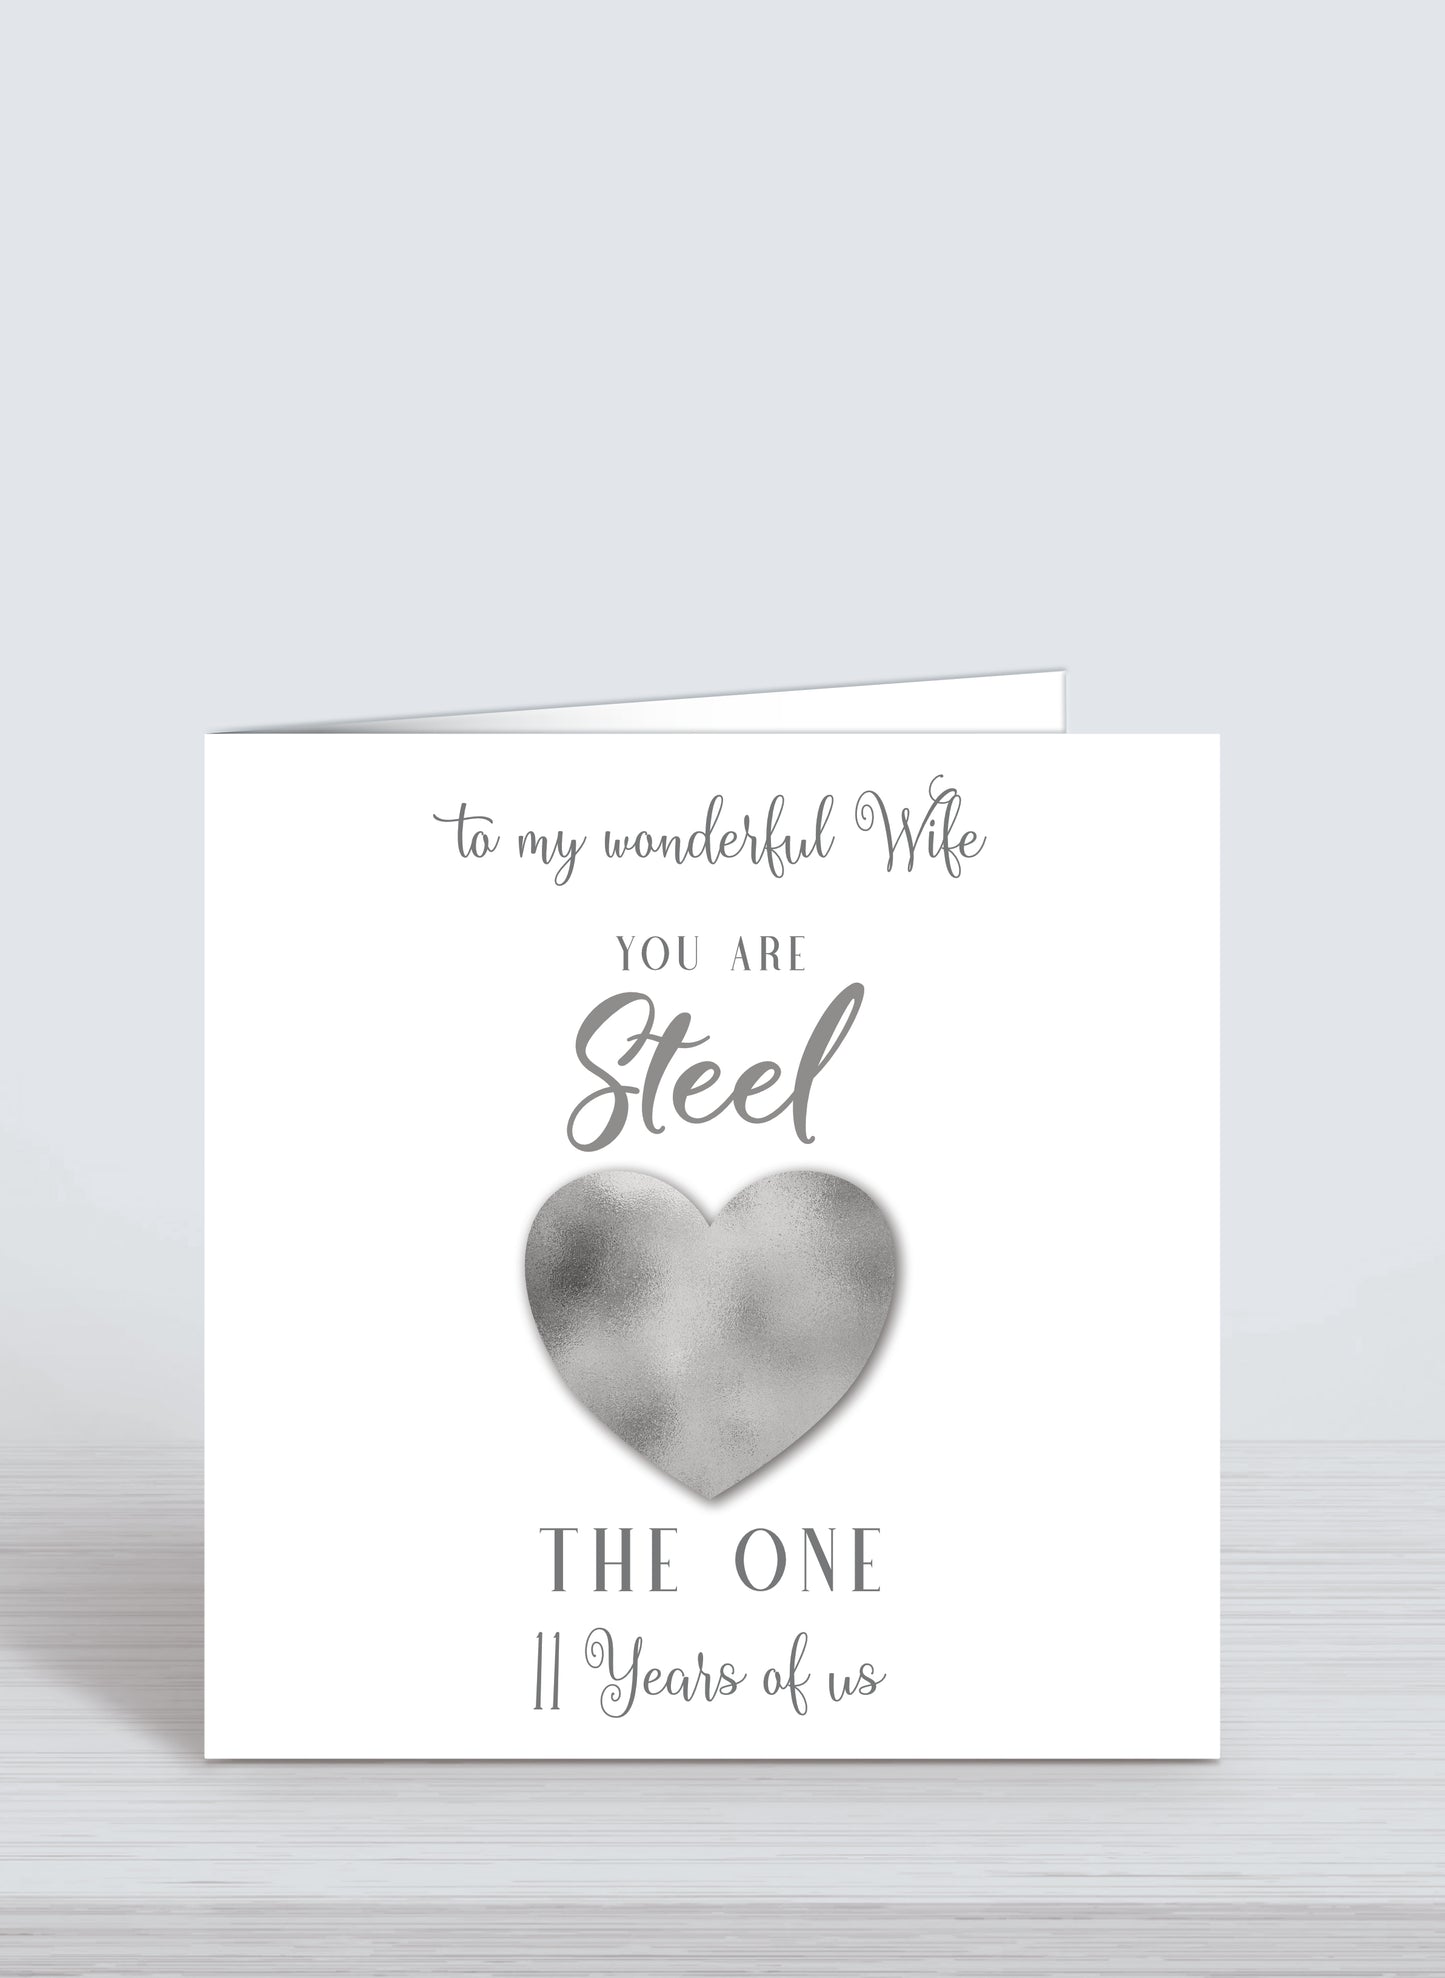 Steel Wedding Anniversary, 11th Wedding Anniversary Card, You Are Steel the one, 11 years of us (To my Wonderful Wife)